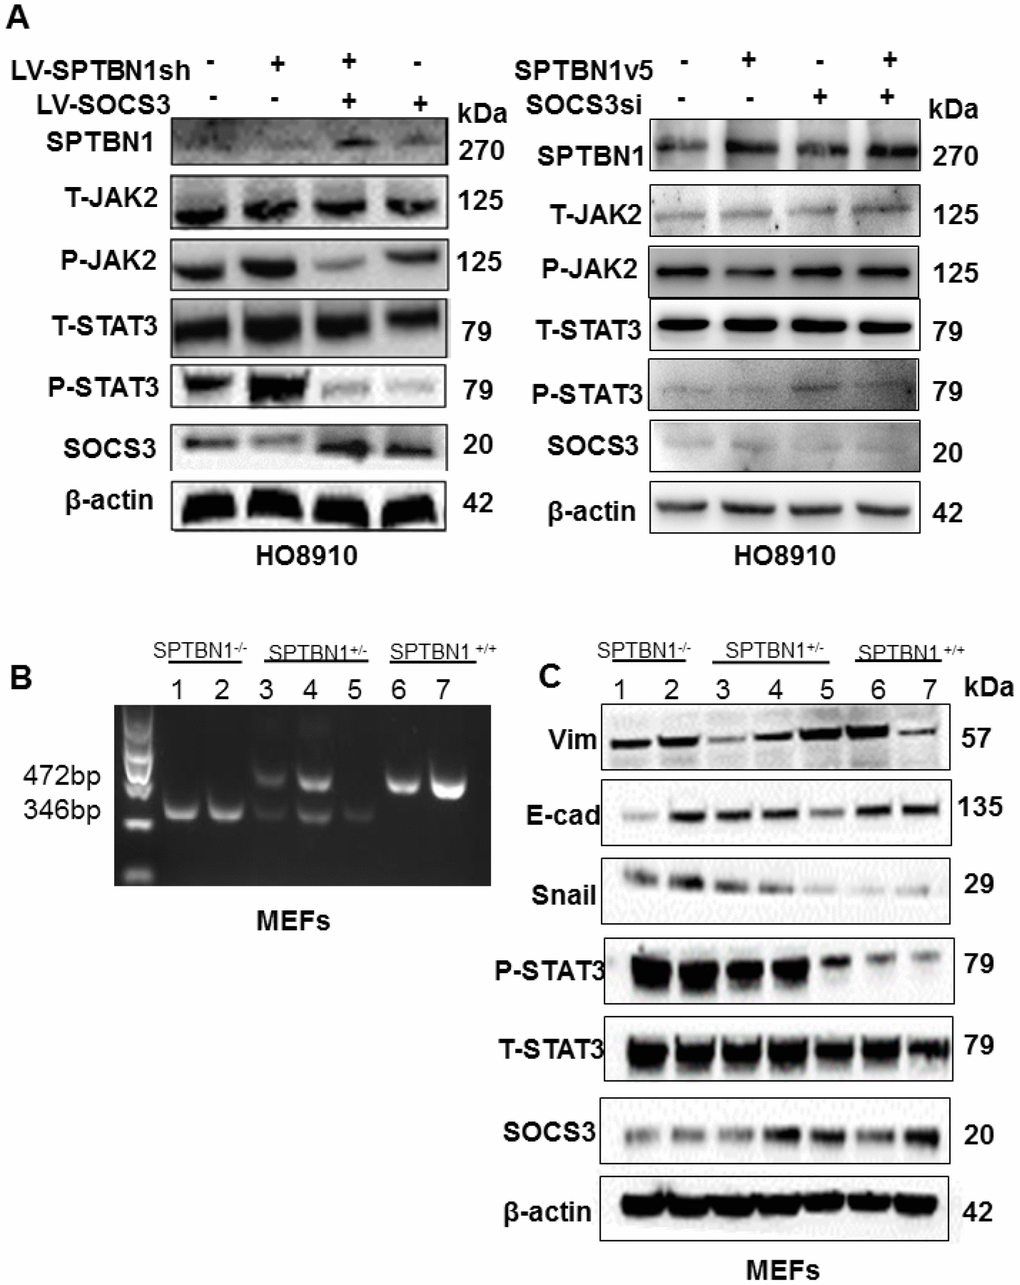 Loss of SPTBN1 activates the JAK/STAT3 signaling pathway through downregulation of SOCS3. (A) Assessments of JAK/STAT signaling pathway-associated proteins by western blot after SPTBN1 knockdown cooperated with SOCS3 overexpression in HO8910 cells (left), and SPTBN1 overexpression cooperated with SOCS3 knockdown (right). (B) DNA gel electrophoresis after PCR. Mouse embryonic fibroblasts (MEFs) were cultured from SPTBN1-/- embryos (n=2), SPTBN1+/- embryos (n=3) and wild-type embryos (n=2). The genotypes of MEFs were identified by PCR and DNA gel electrophoresis. Lanes 1 and 2: SPTBN1-/- MEFs; lanes 3, 4, and 5: SPTBN1+/- MEFs; lanes 6 and 7: SPTBN1-/- MEFs. (C) Assessments of EMT and JAK/STAT3 signaling pathway-associated proteins by western blot in SPTBN1-/-, SPTBN1+/-, and SPTBN1+/+ MEFs. Lanes 1 and 2: SPTBN1-/- MEFs; lanes 3, 4, and 5: SPTBN1+/- MEFs; lanes 6 and 7: SPTBN1-/- MEFs. Loss of SPTBN1 can promote EMT, inhibit SOCS3 and activate the JAK/STAT signaling pathway.